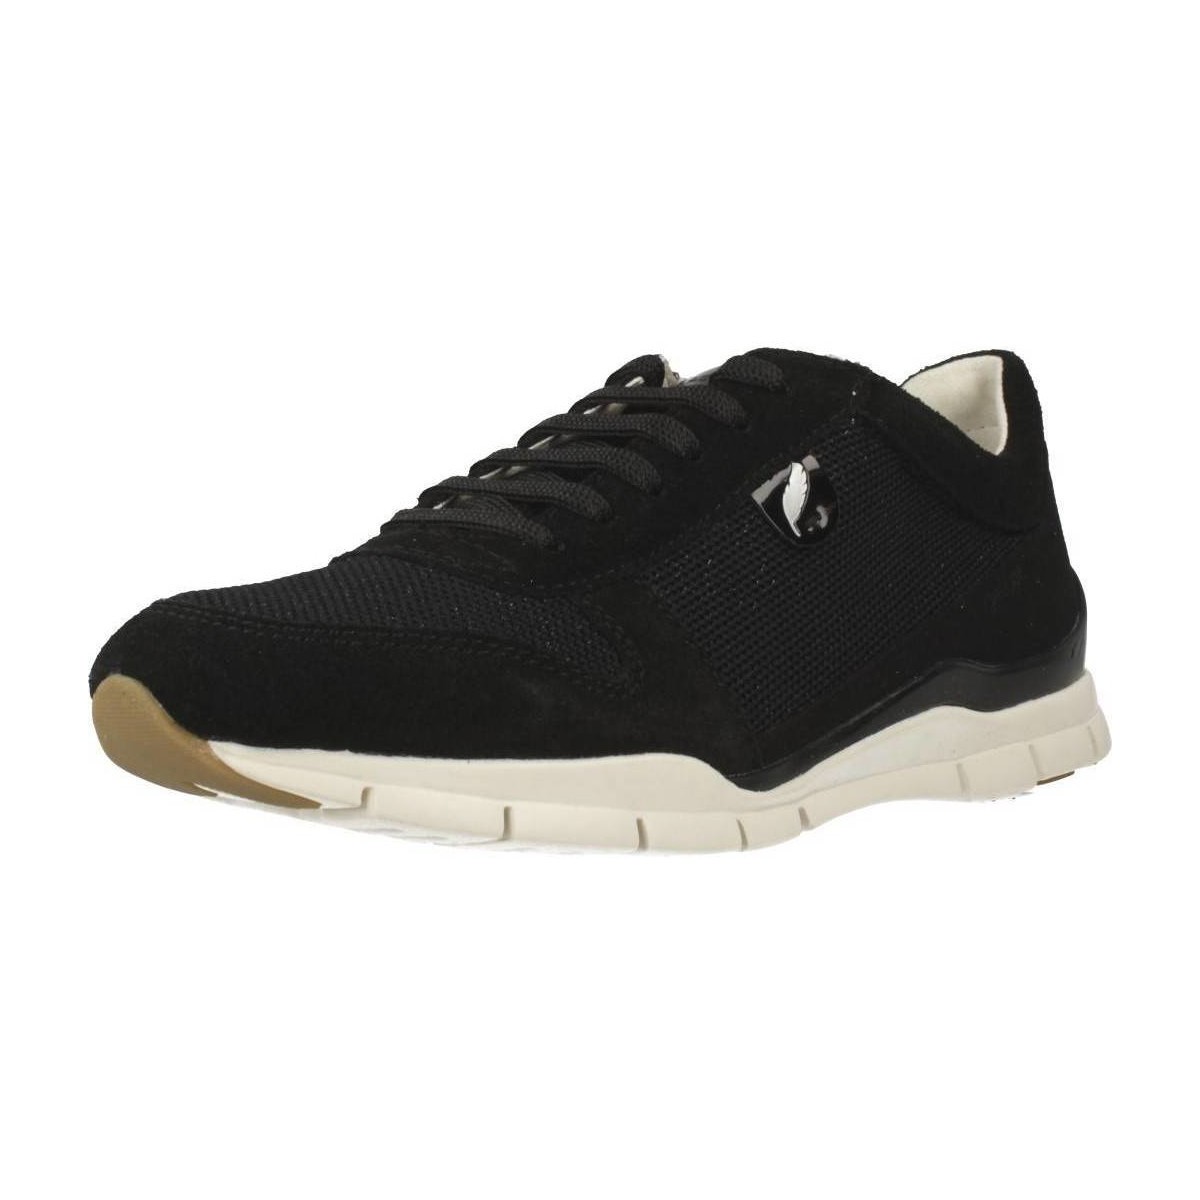 Geox D A Negro - Zapatos Deportivas Mujer 49,95 €